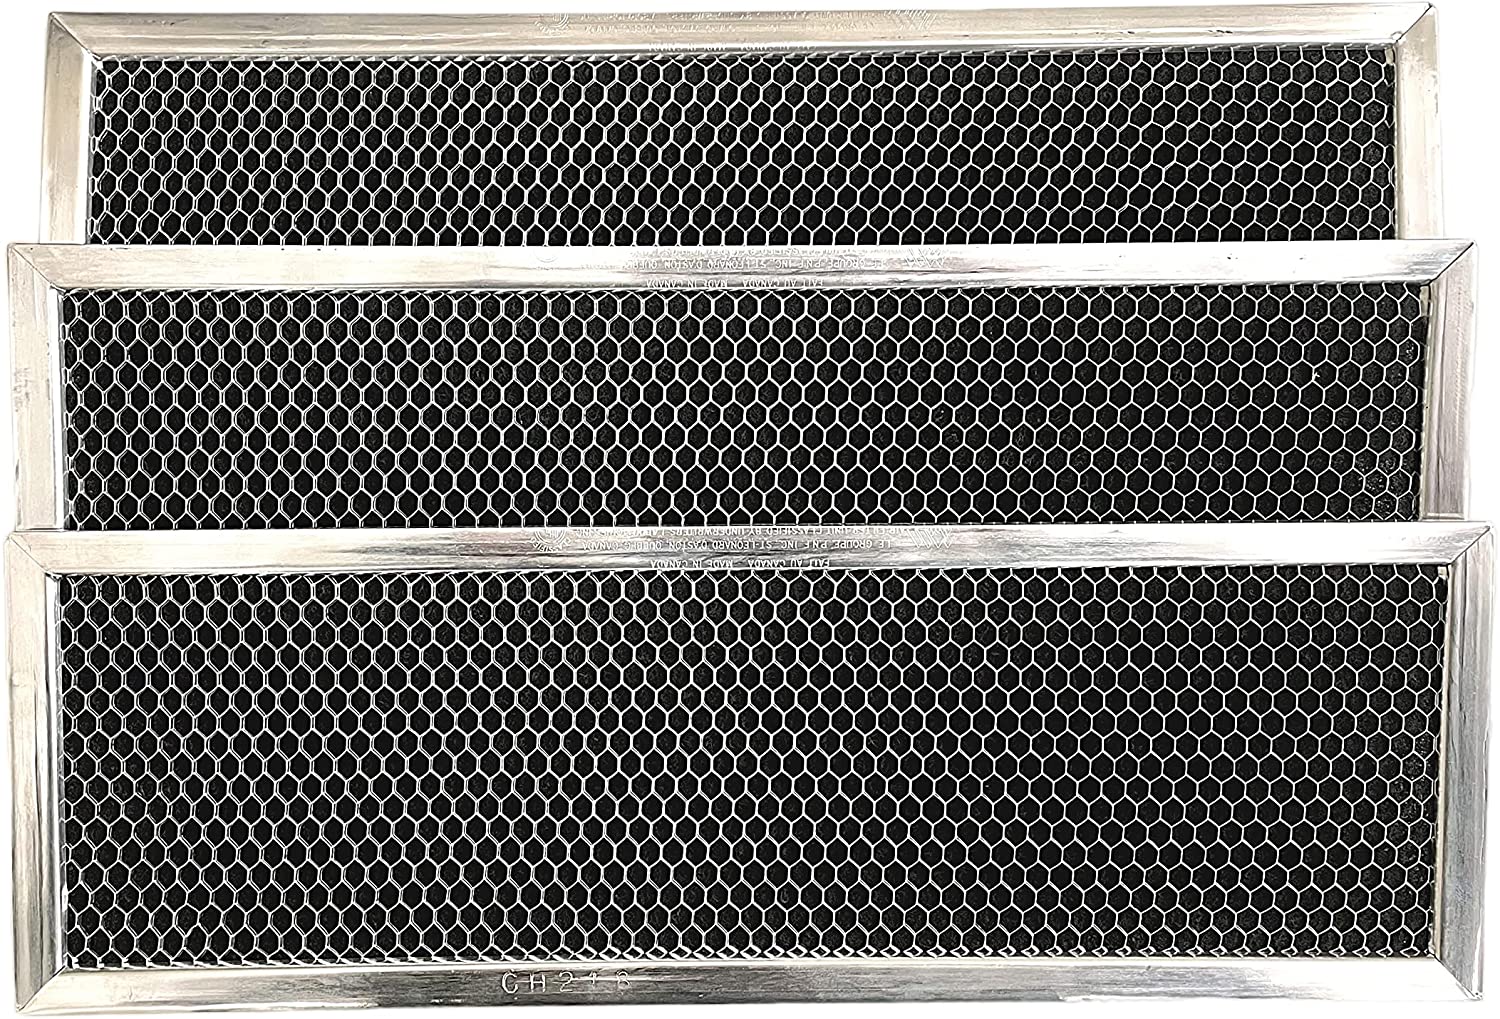 Carrier 1156-3 Carbon Filters for EAC's. Package of 3